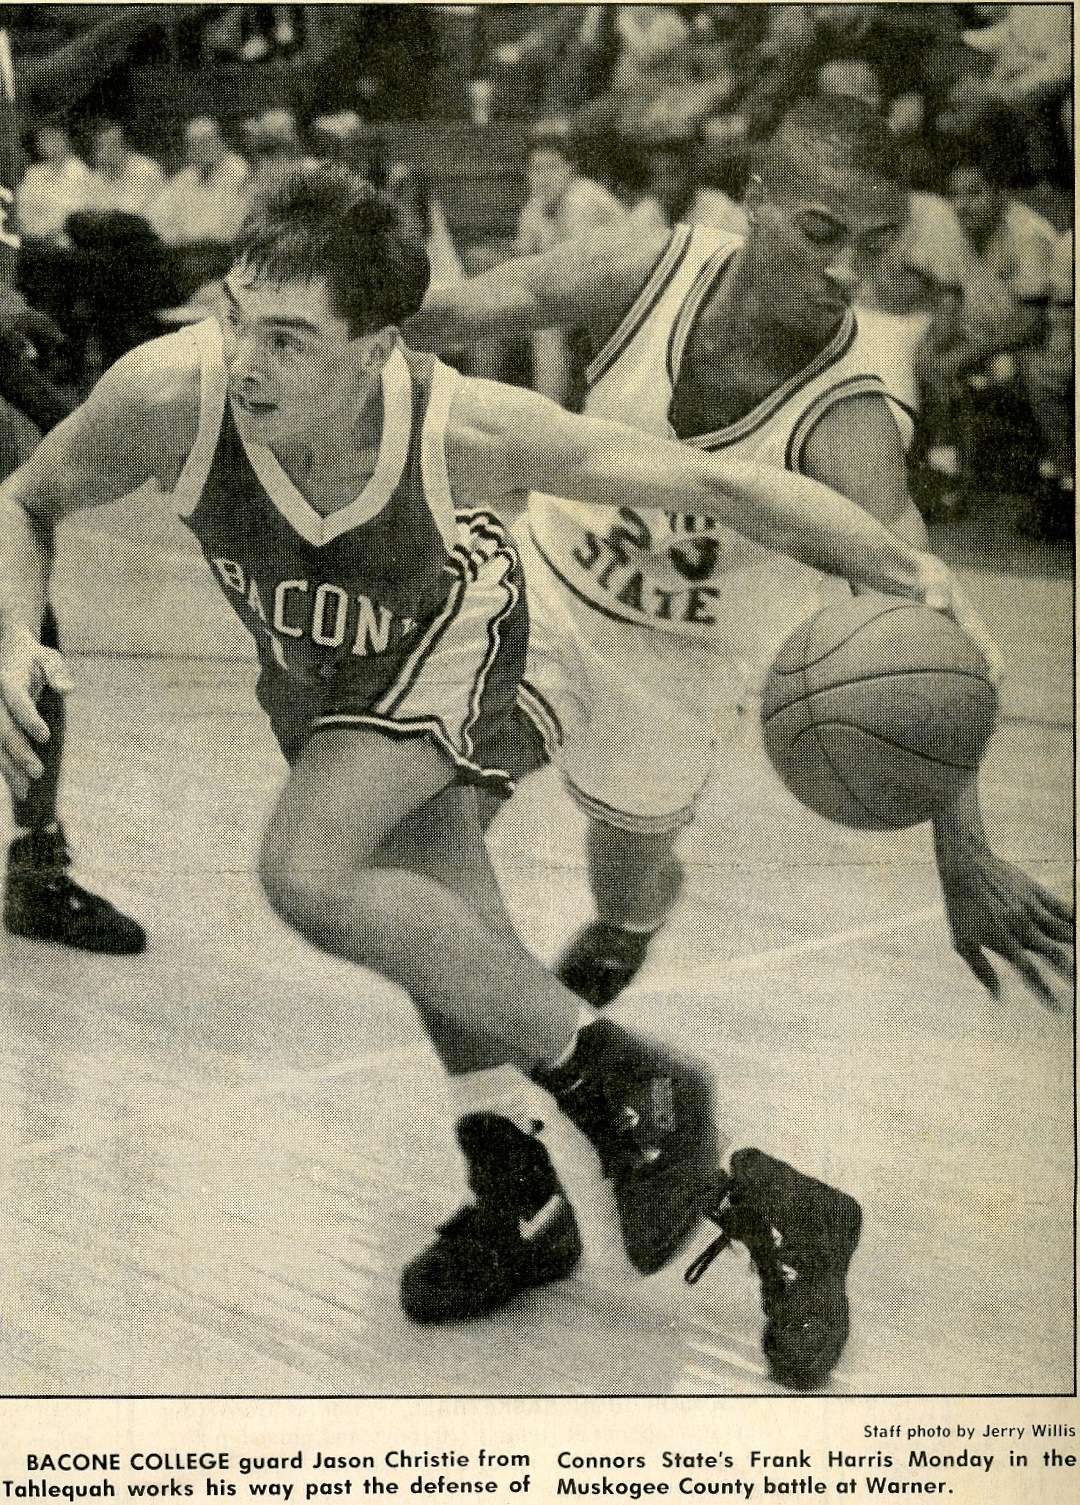 While in his second season at Bacone, which competed in a junior college conference loaded with future Division I talent, Christie often played point guard. In a game against Grayson County (Texas) JC, a newspaper article recounted how, after sitting most of the second half with 4 fouls, Christie came off the bench to hit 